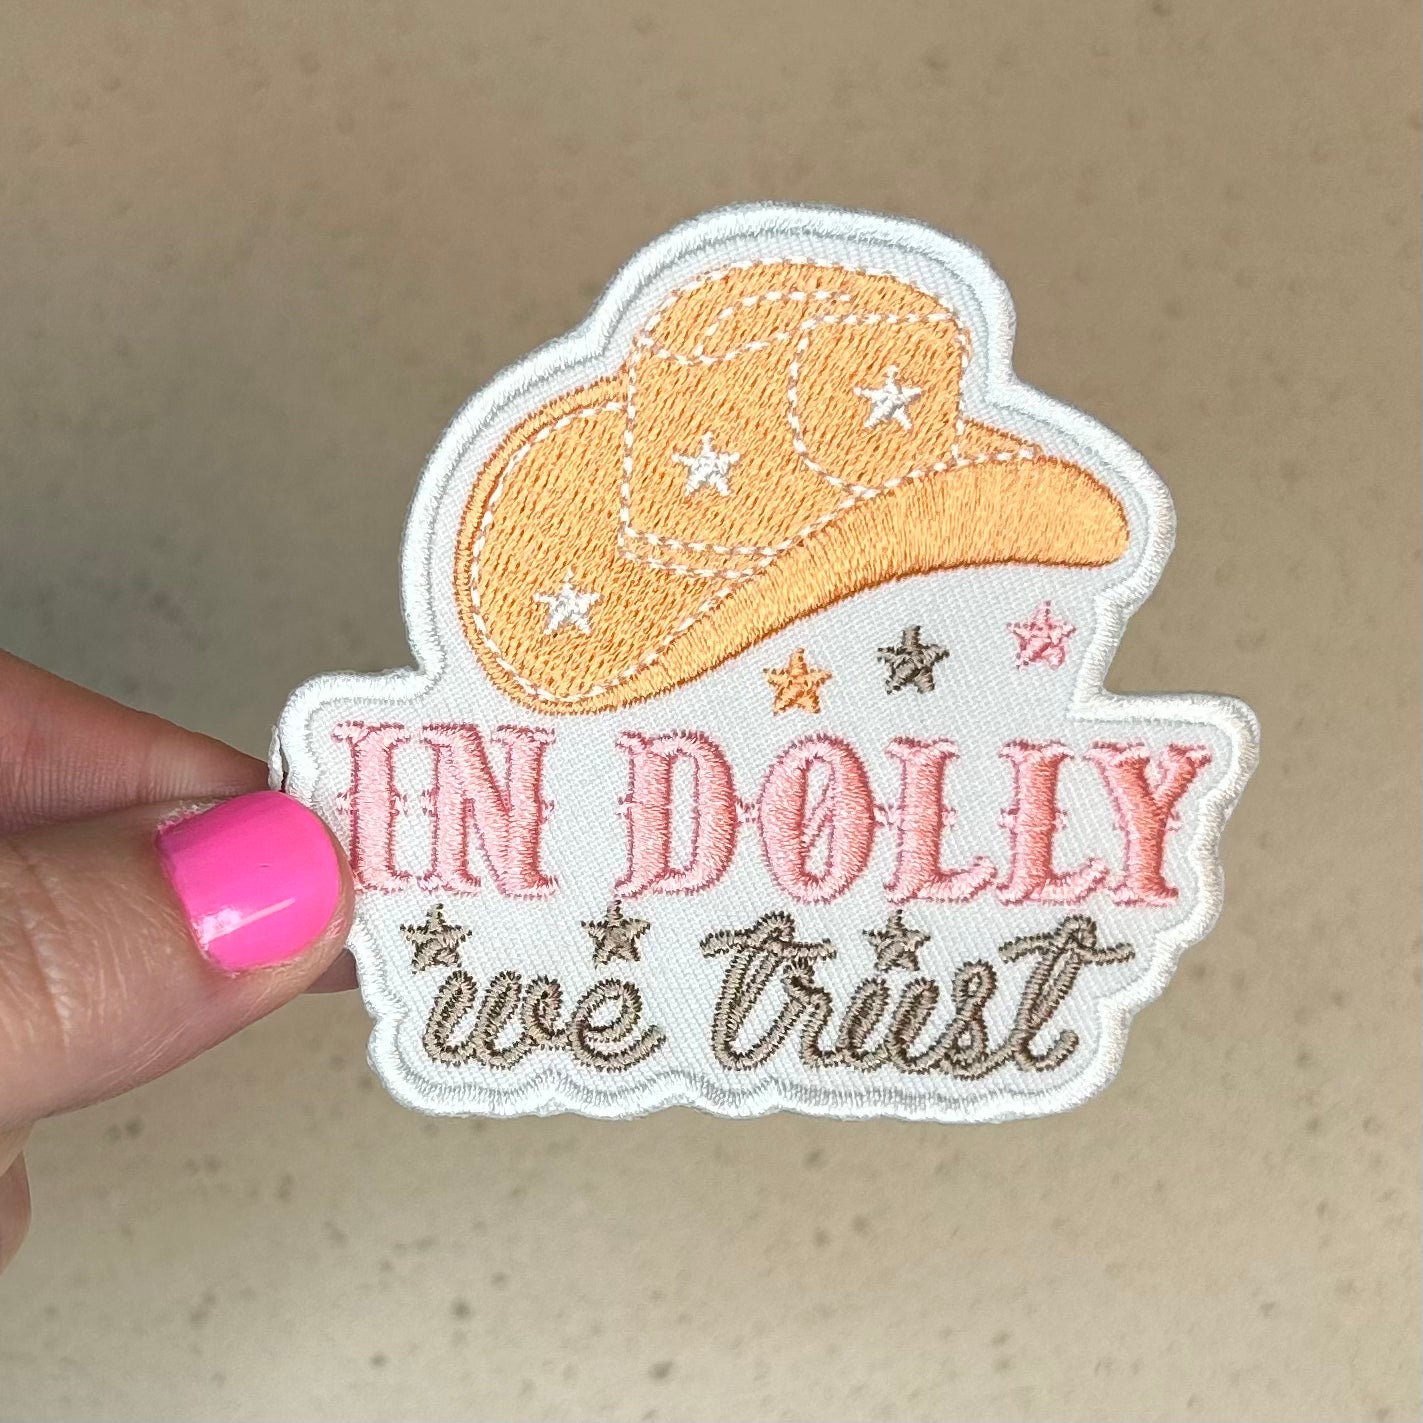 In Dolly We Trust Patch